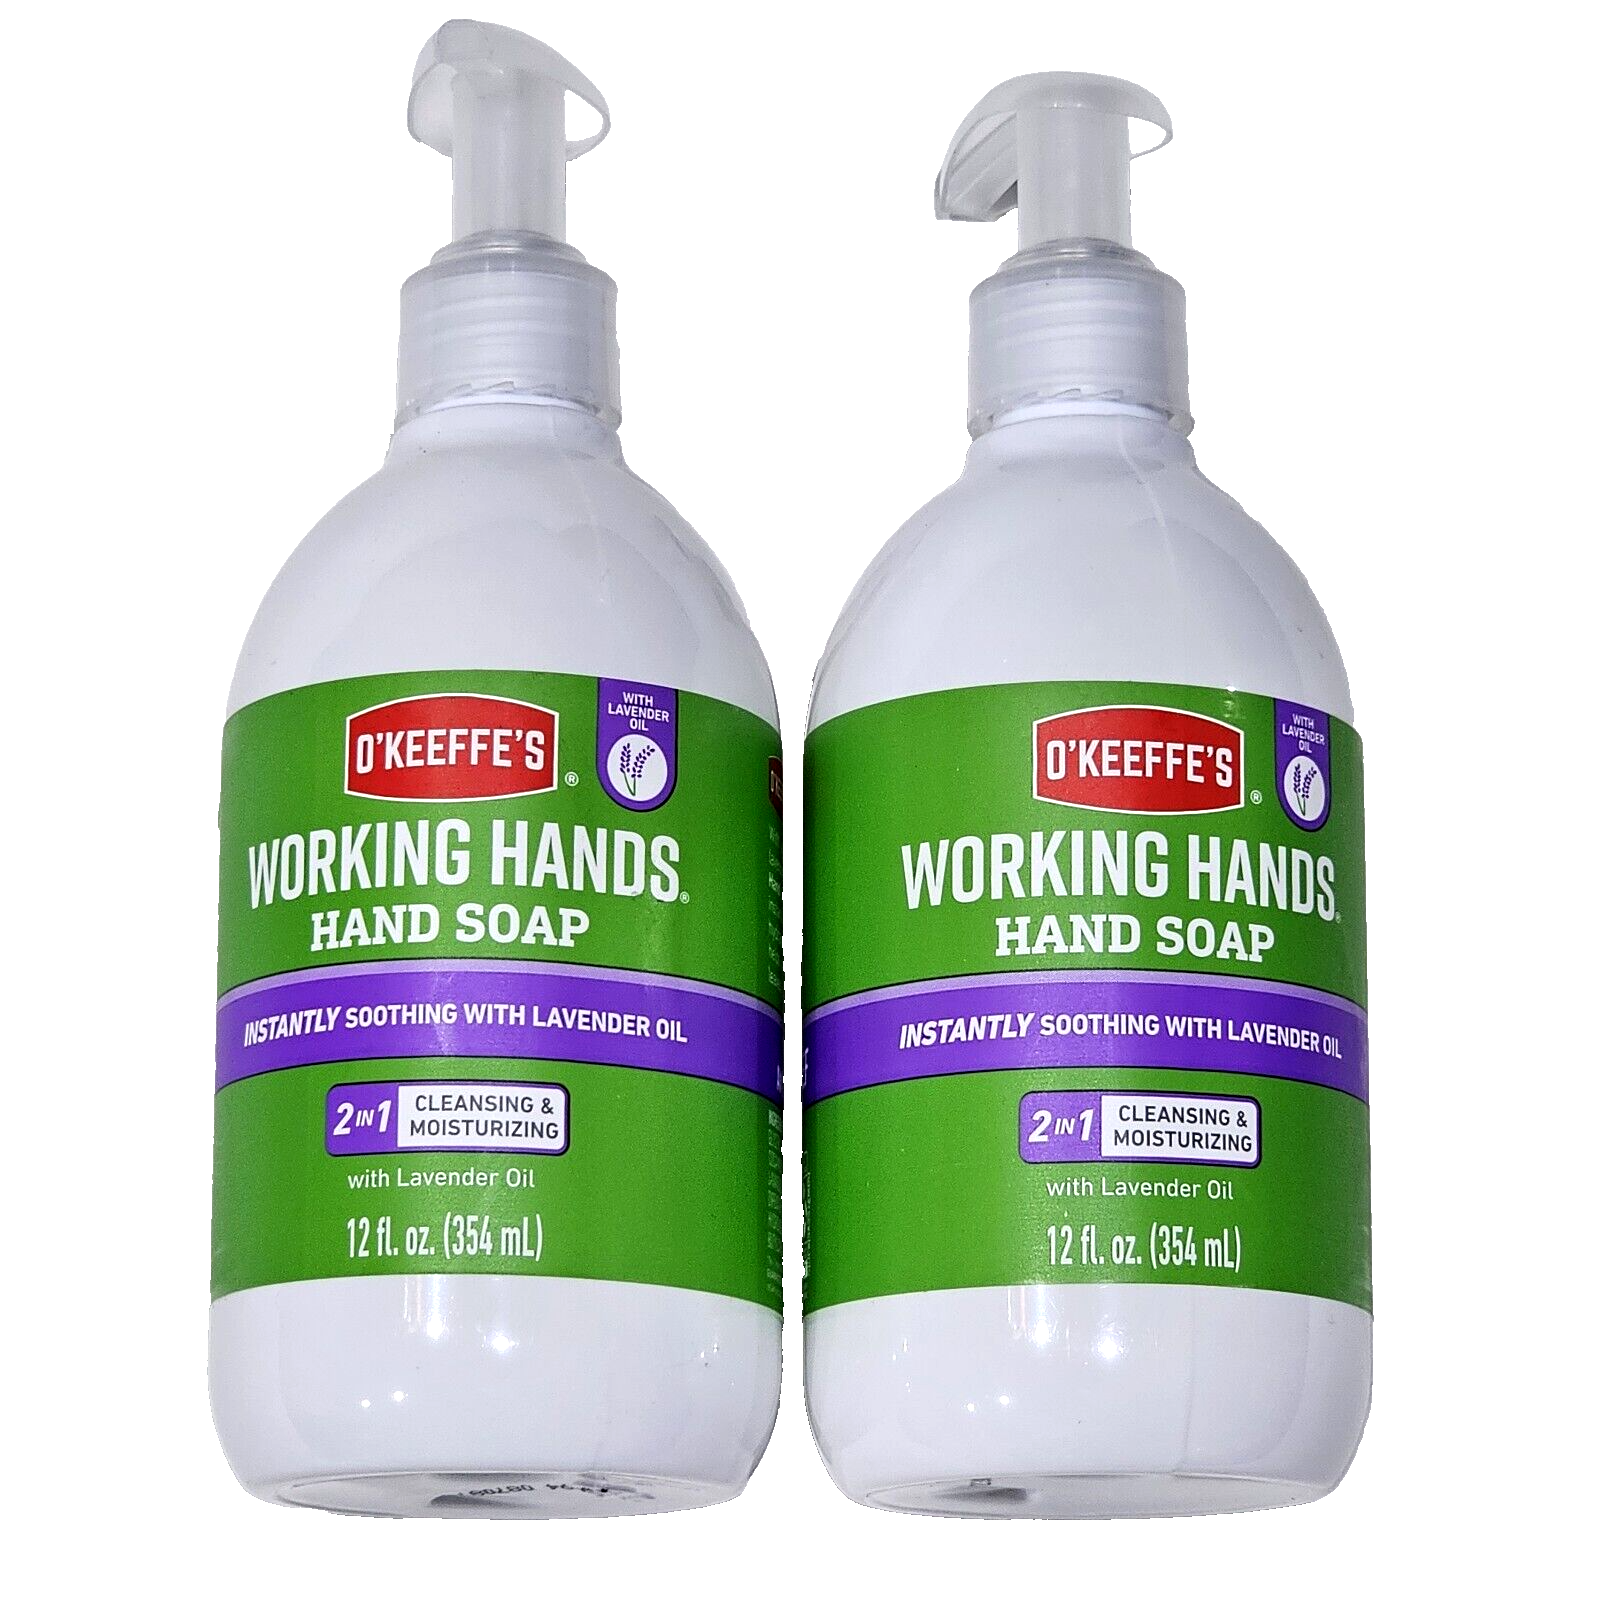 Primary image for 2 Pk O'keeffe's Working Hands Hand Soap Soothing Lavender Oil Moisturizing 12oz